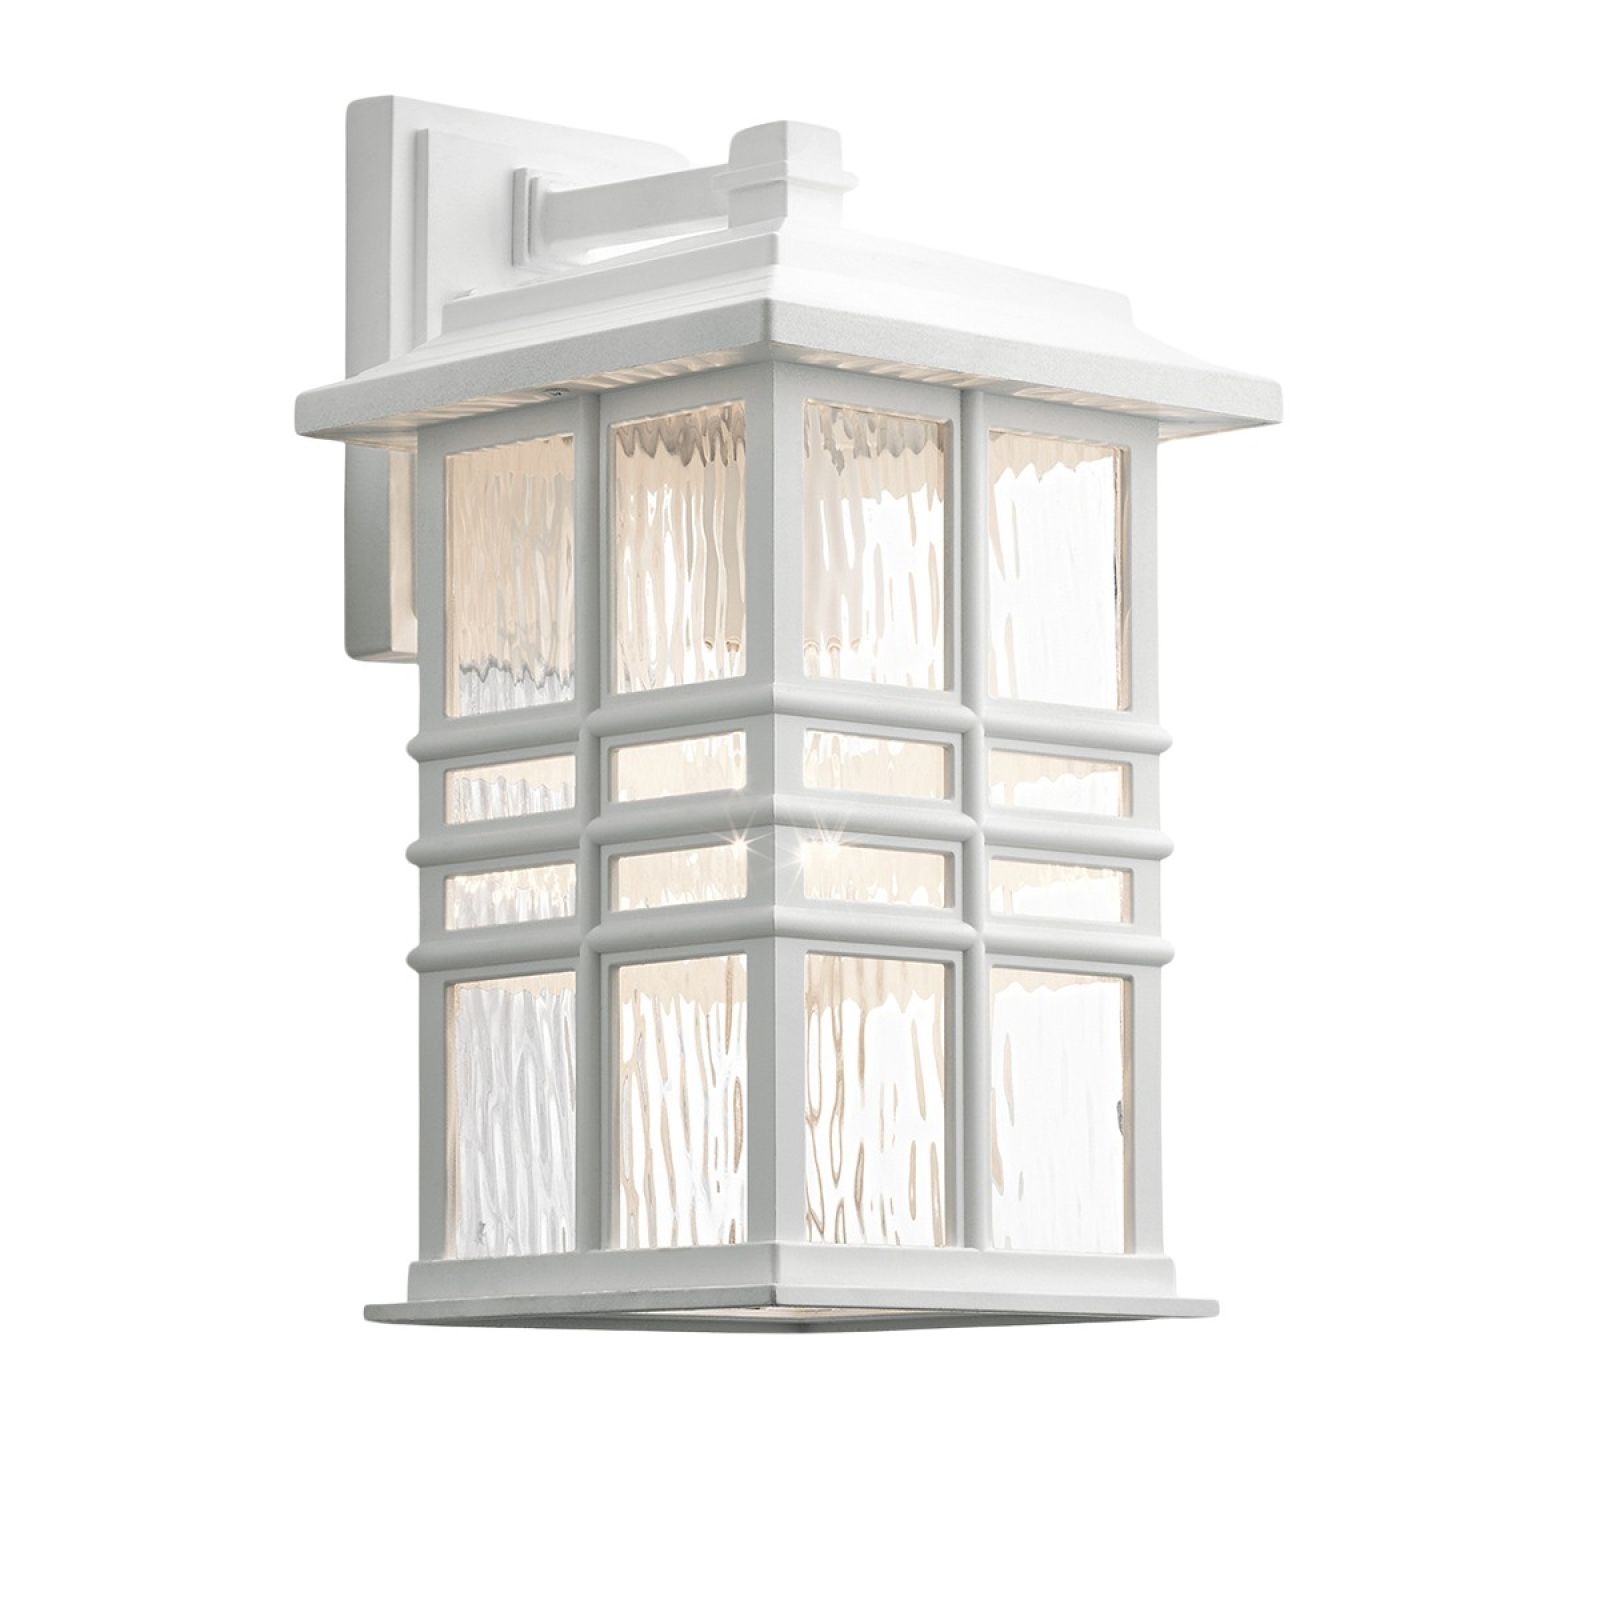 Beacon exterior wall light in white in a choice of sizes